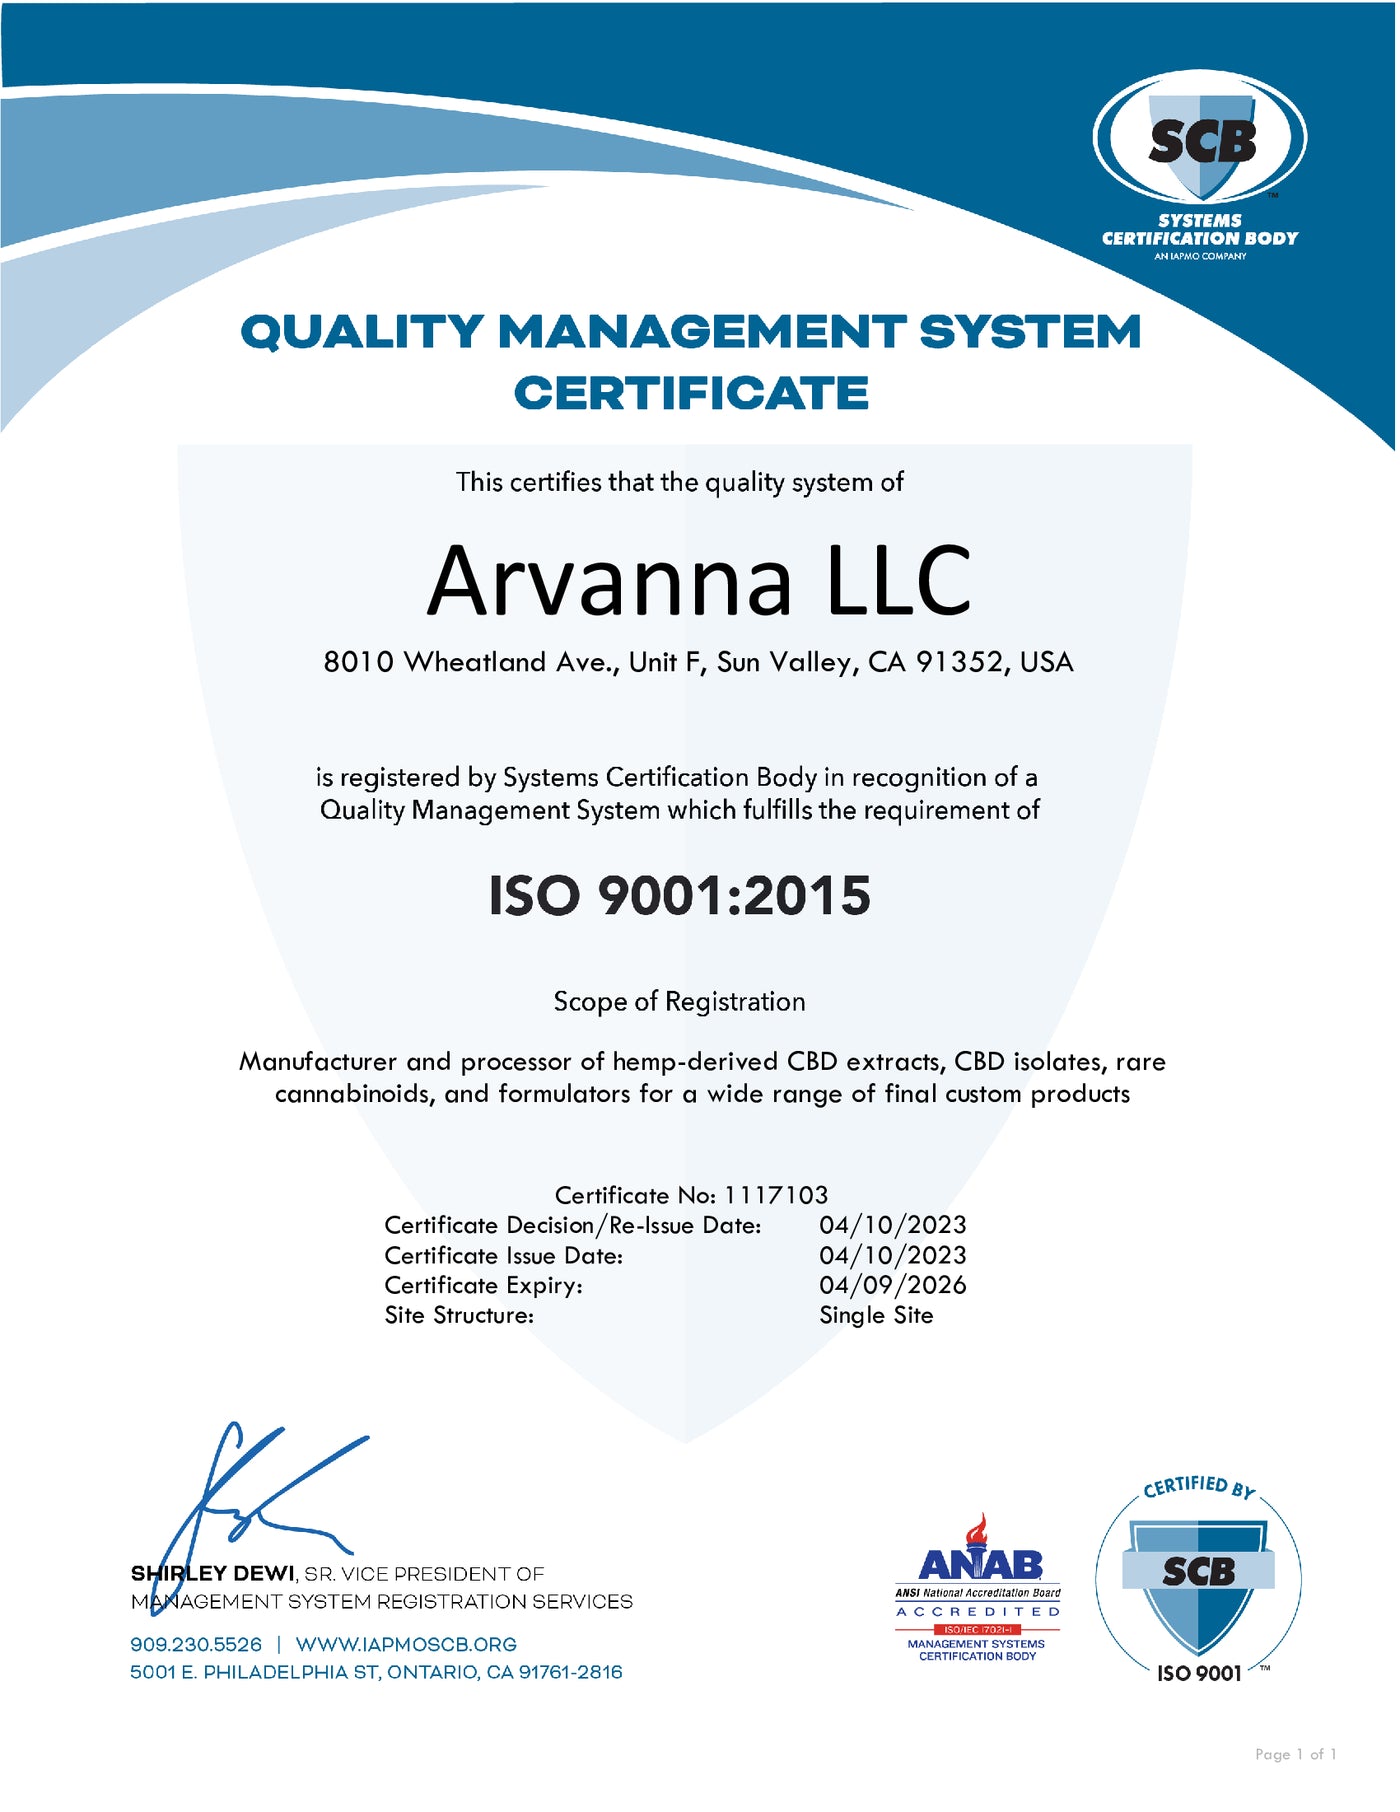 Arvanna ISO 9001 2015 Certification by SCB 